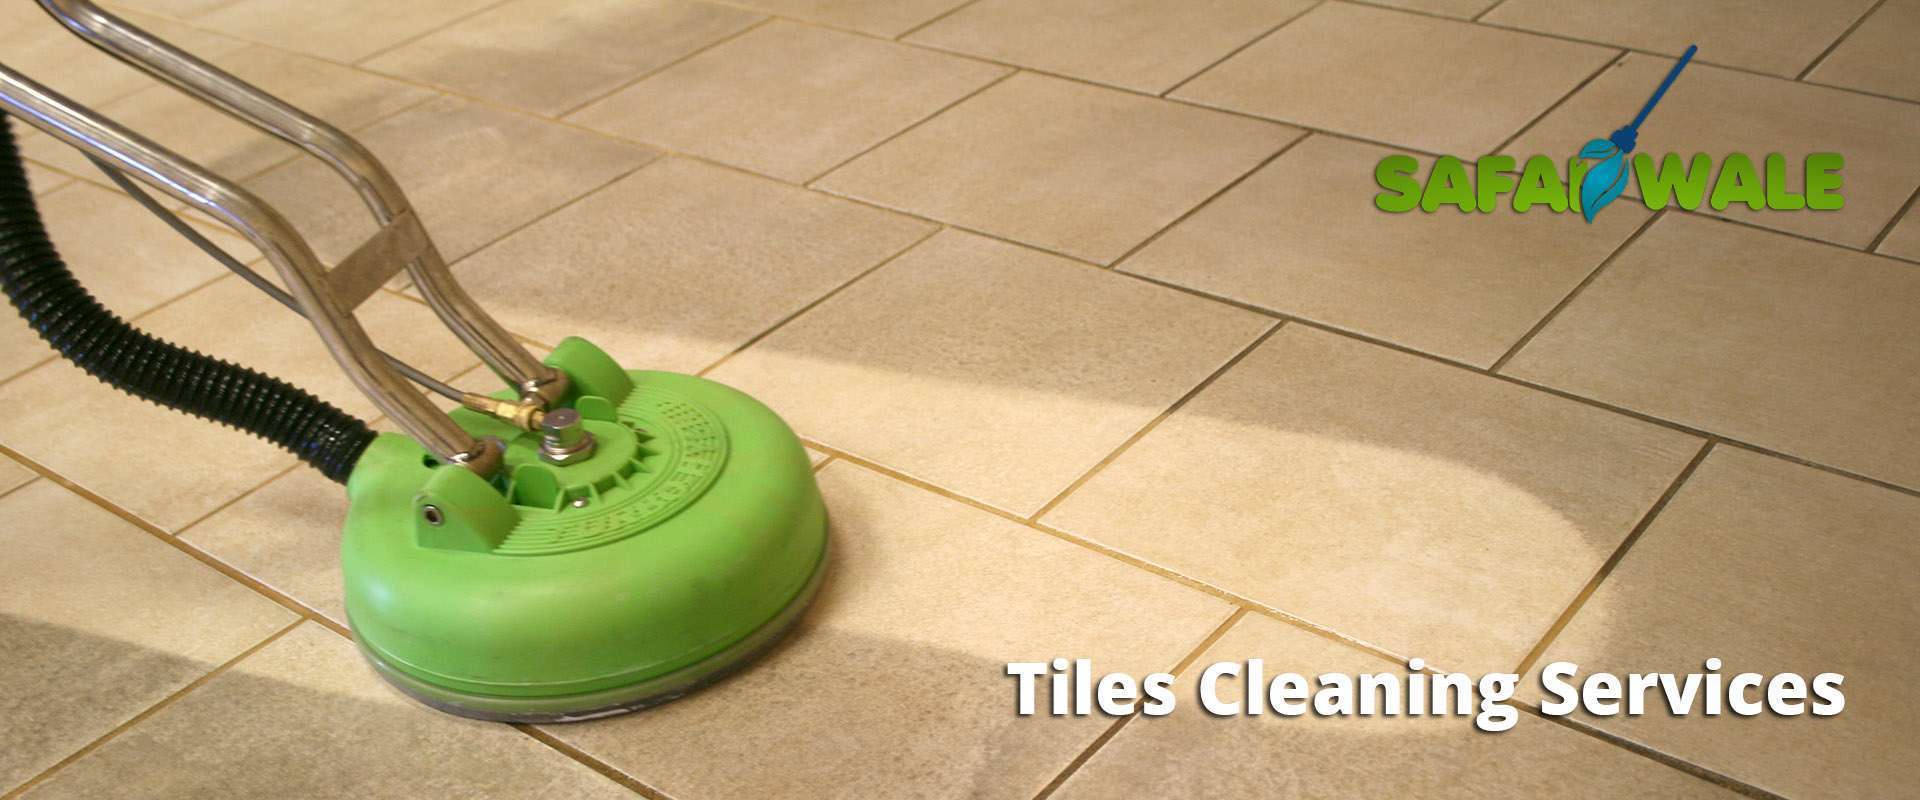 Tiles Cleaning Services In Lucknow